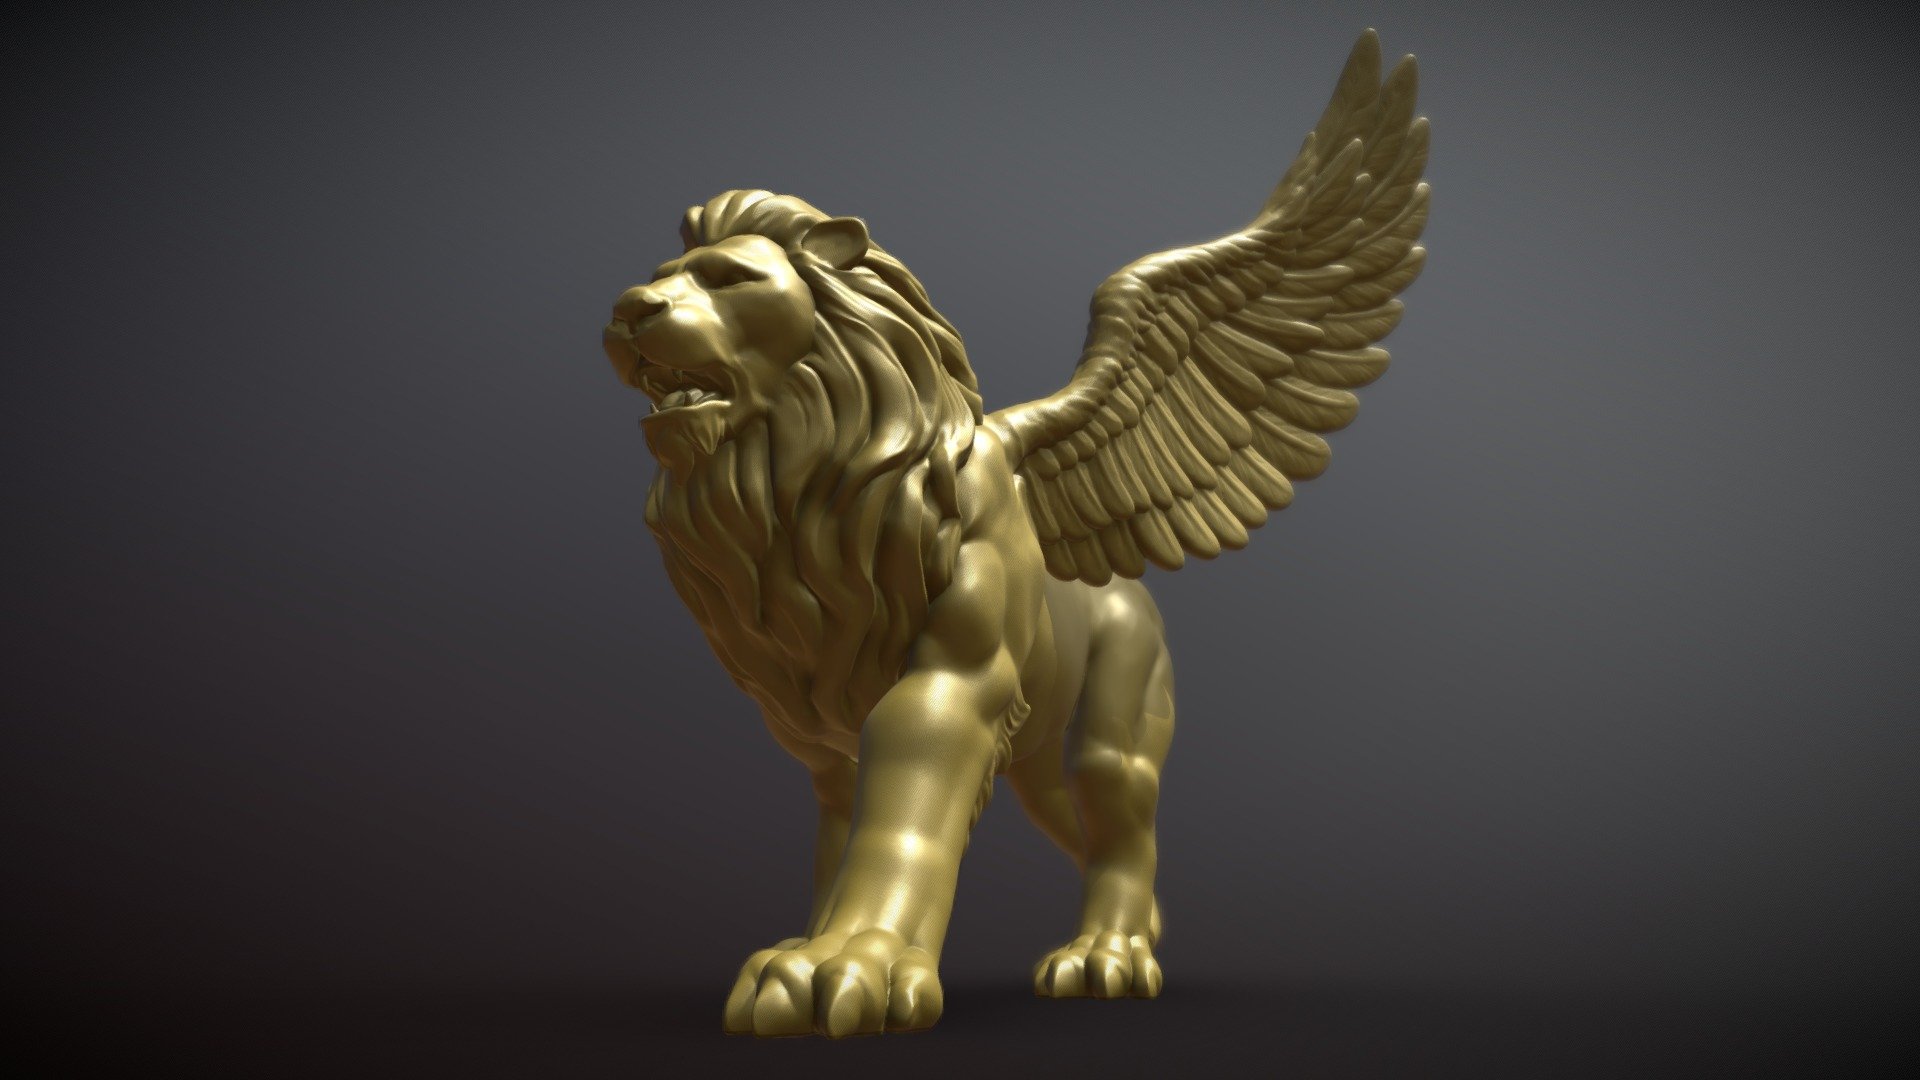 High poly 3d model of a Lion with wings created in Zbrush. Model watertight and can be printed. 
Additional stl file format. Hope you like it 3d model